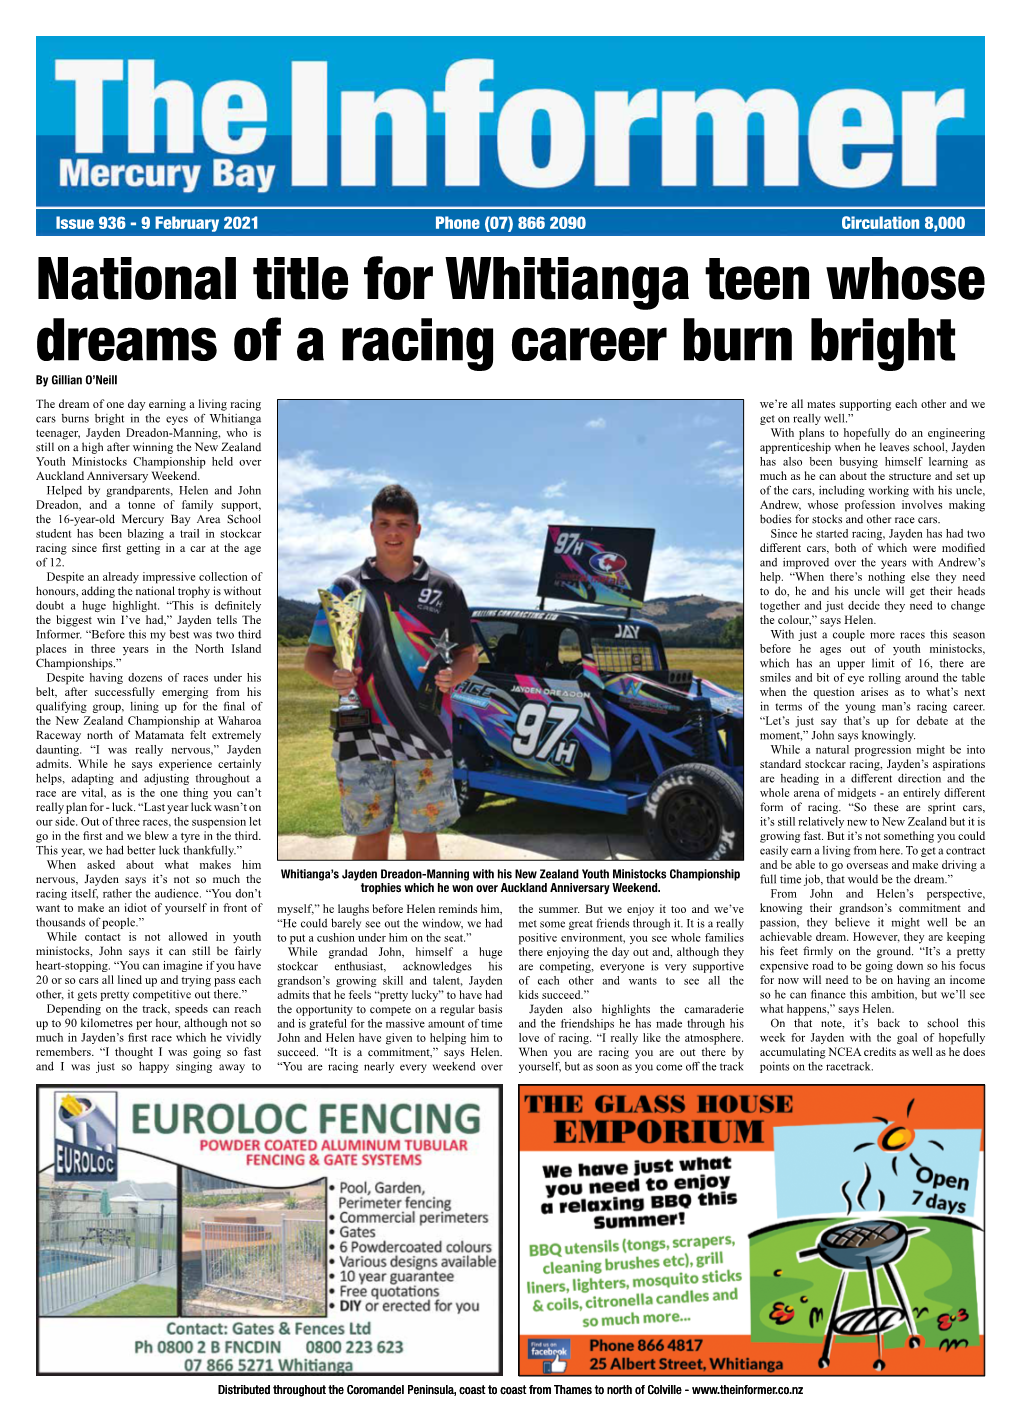 National Title for Whitianga Teen Whose Dreams of a Racing Career Burn Bright